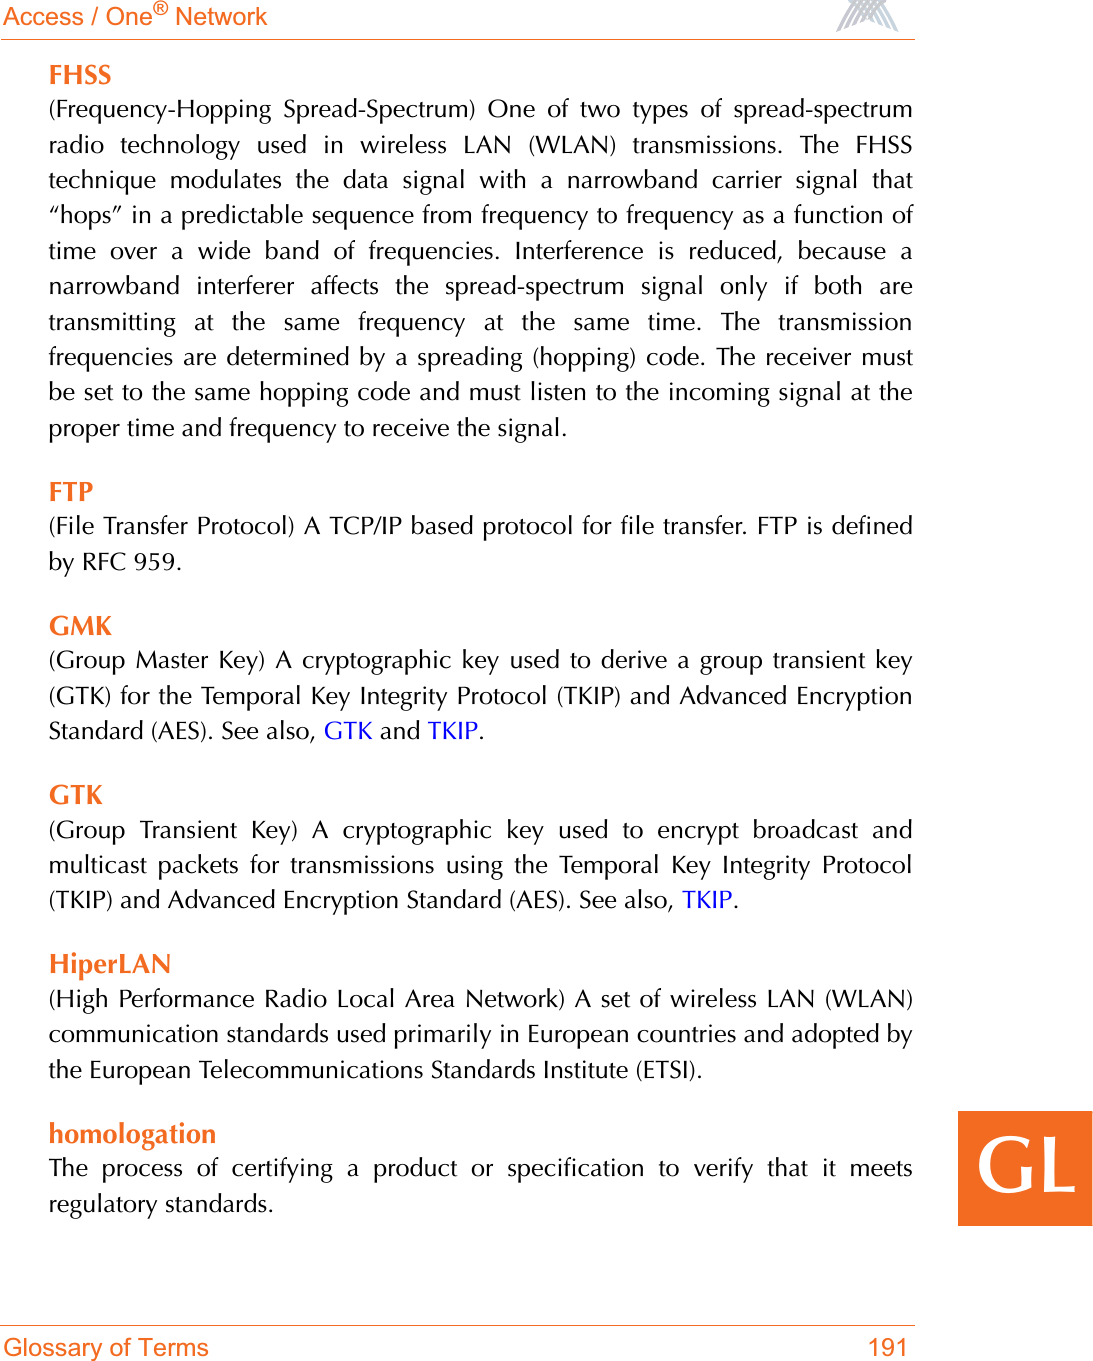 Access / One® NetworkGlossary of Terms 191GLFHSS(Frequency-Hopping Spread-Spectrum) One of two types of spread-spectrumradio technology used in wireless LAN (WLAN) transmissions. The FHSStechnique modulates the data signal with a narrowband carrier signal that“hops” in a predictable sequence from frequency to frequency as a function oftime over a wide band of frequencies. Interference is reduced, because anarrowband interferer affects the spread-spectrum signal only if both aretransmitting at the same frequency at the same time. The transmissionfrequencies are determined by a spreading (hopping) code. The receiver mustbe set to the same hopping code and must listen to the incoming signal at theproper time and frequency to receive the signal.FTP(File Transfer Protocol) A TCP/IP based protocol for file transfer. FTP is definedby RFC 959.GMK(Group Master Key) A cryptographic key used to derive a group transient key(GTK) for the Temporal Key Integrity Protocol (TKIP) and Advanced EncryptionStandard (AES). See also, GTK and TKIP.GTK(Group Transient Key) A cryptographic key used to encrypt broadcast andmulticast packets for transmissions using the Temporal Key Integrity Protocol(TKIP) and Advanced Encryption Standard (AES). See also, TKIP.HiperLAN(High Performance Radio Local Area Network) A set of wireless LAN (WLAN)communication standards used primarily in European countries and adopted bythe European Telecommunications Standards Institute (ETSI). homologationThe process of certifying a product or specification to verify that it meetsregulatory standards.